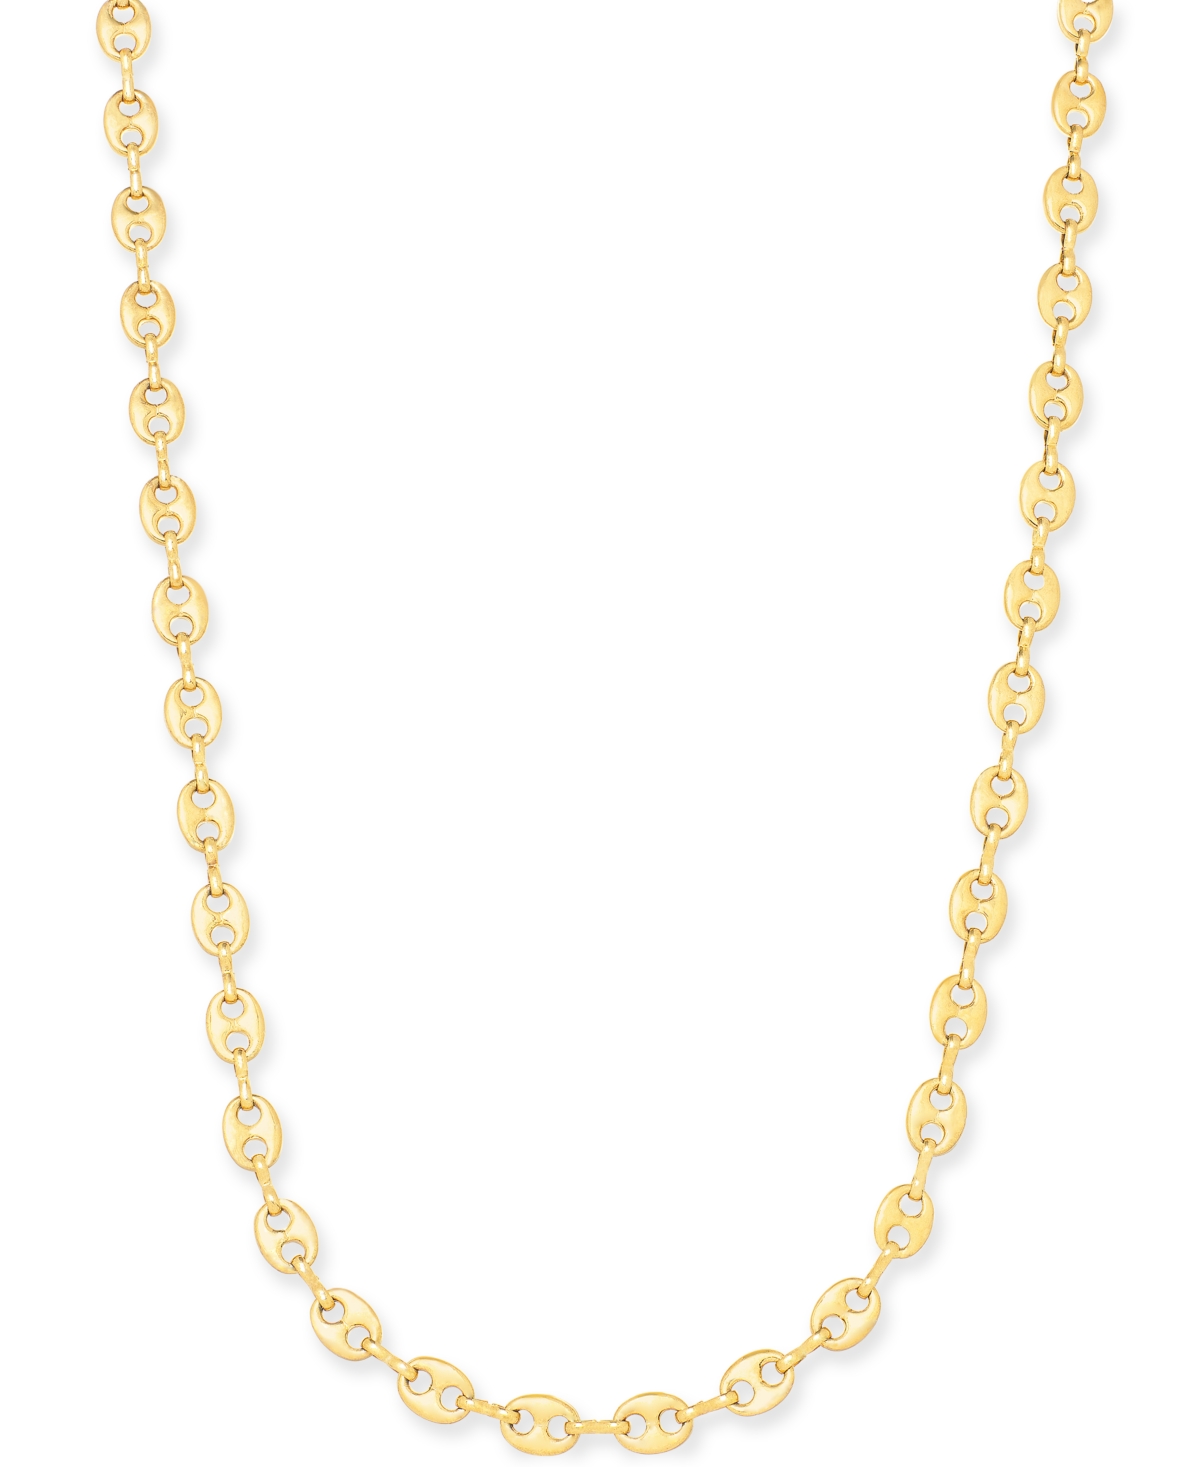 Lola Ade 18k Gold Plated Large Link 20" Strand Necklace